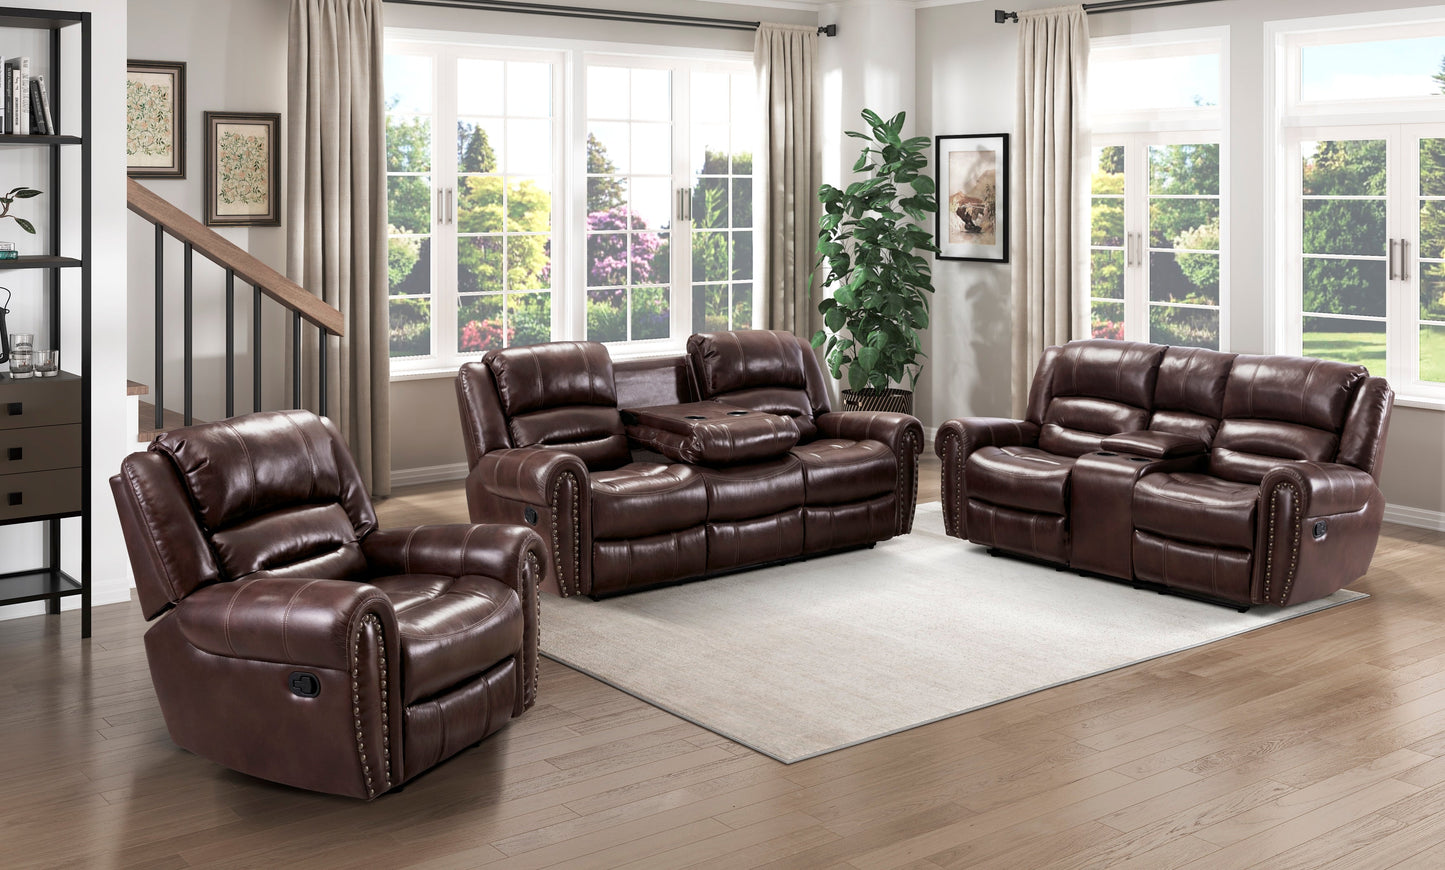 Center Hill Brown Double Reclining Sofa with Center Drop-down Cup Holders